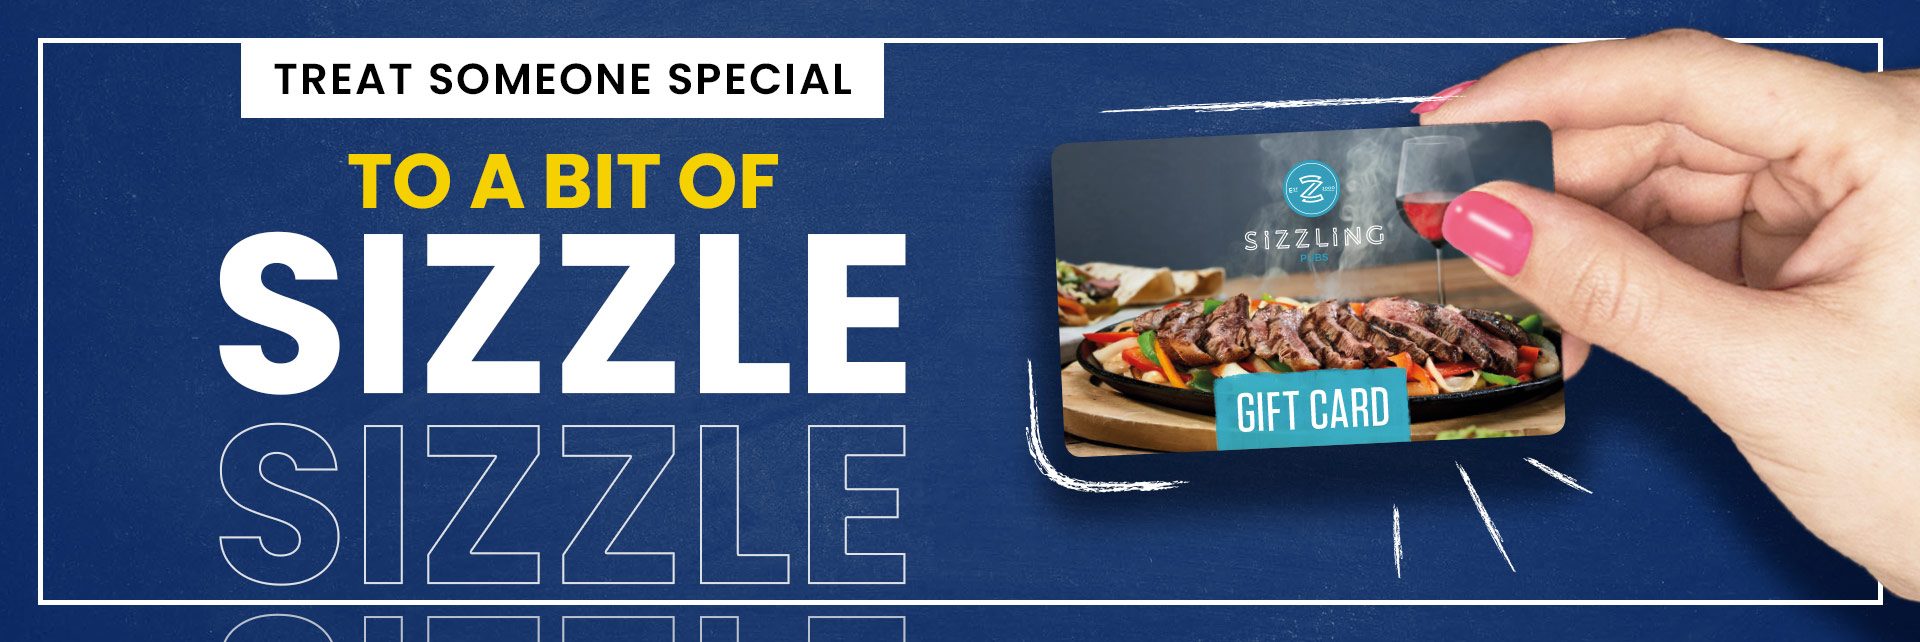 Sizzling Pubs Gift Card at The Old Horns in Birmingham